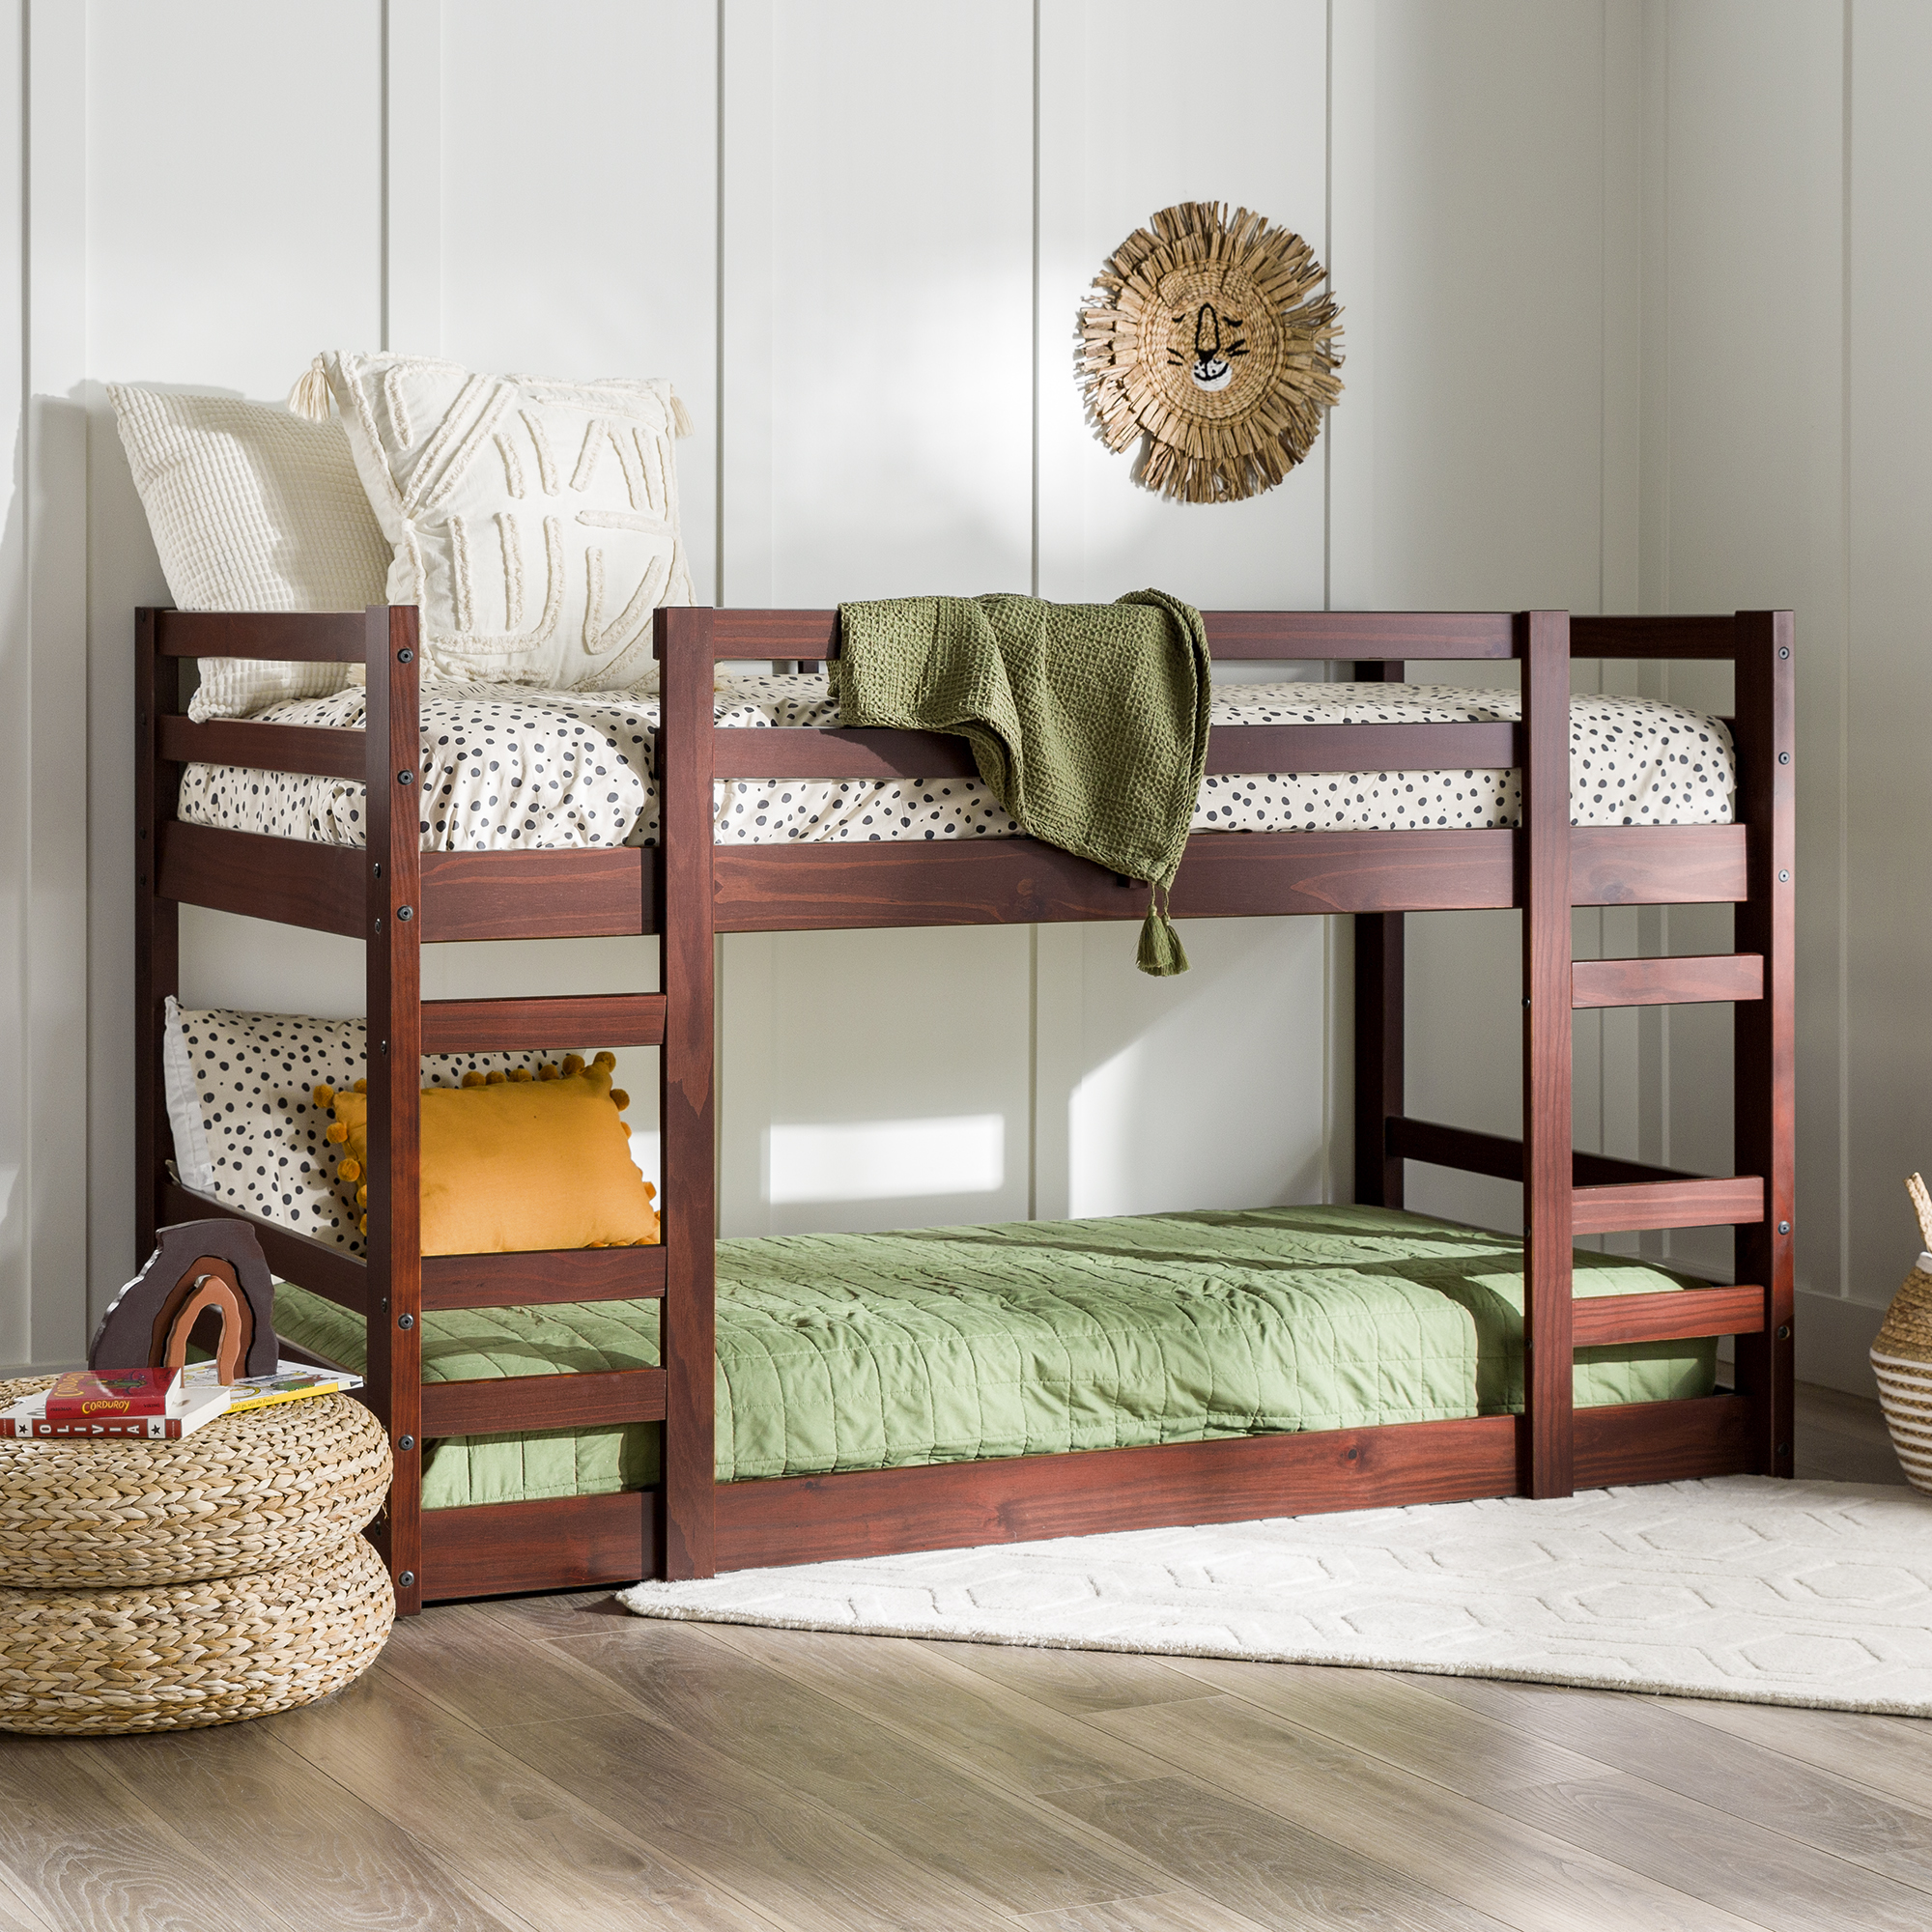 Manor Park Transitional Youth Twin Over Twin Bunk Bed Frame, Espresso - image 1 of 17